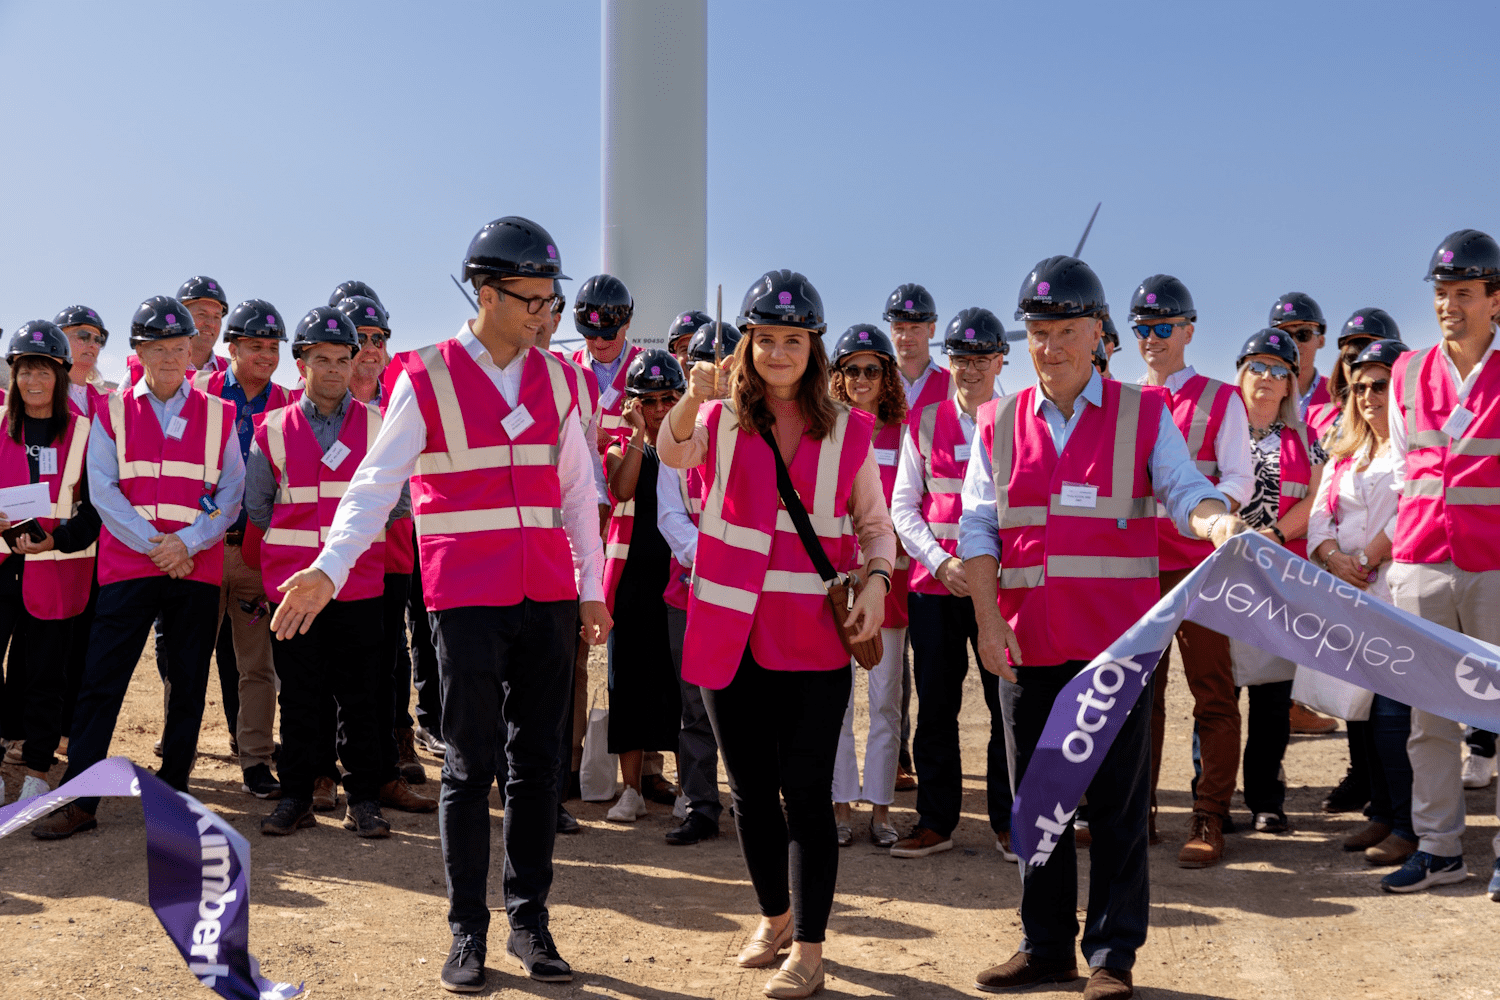 Kimberly-Clark Professional Launches First-Ever Wind Farm